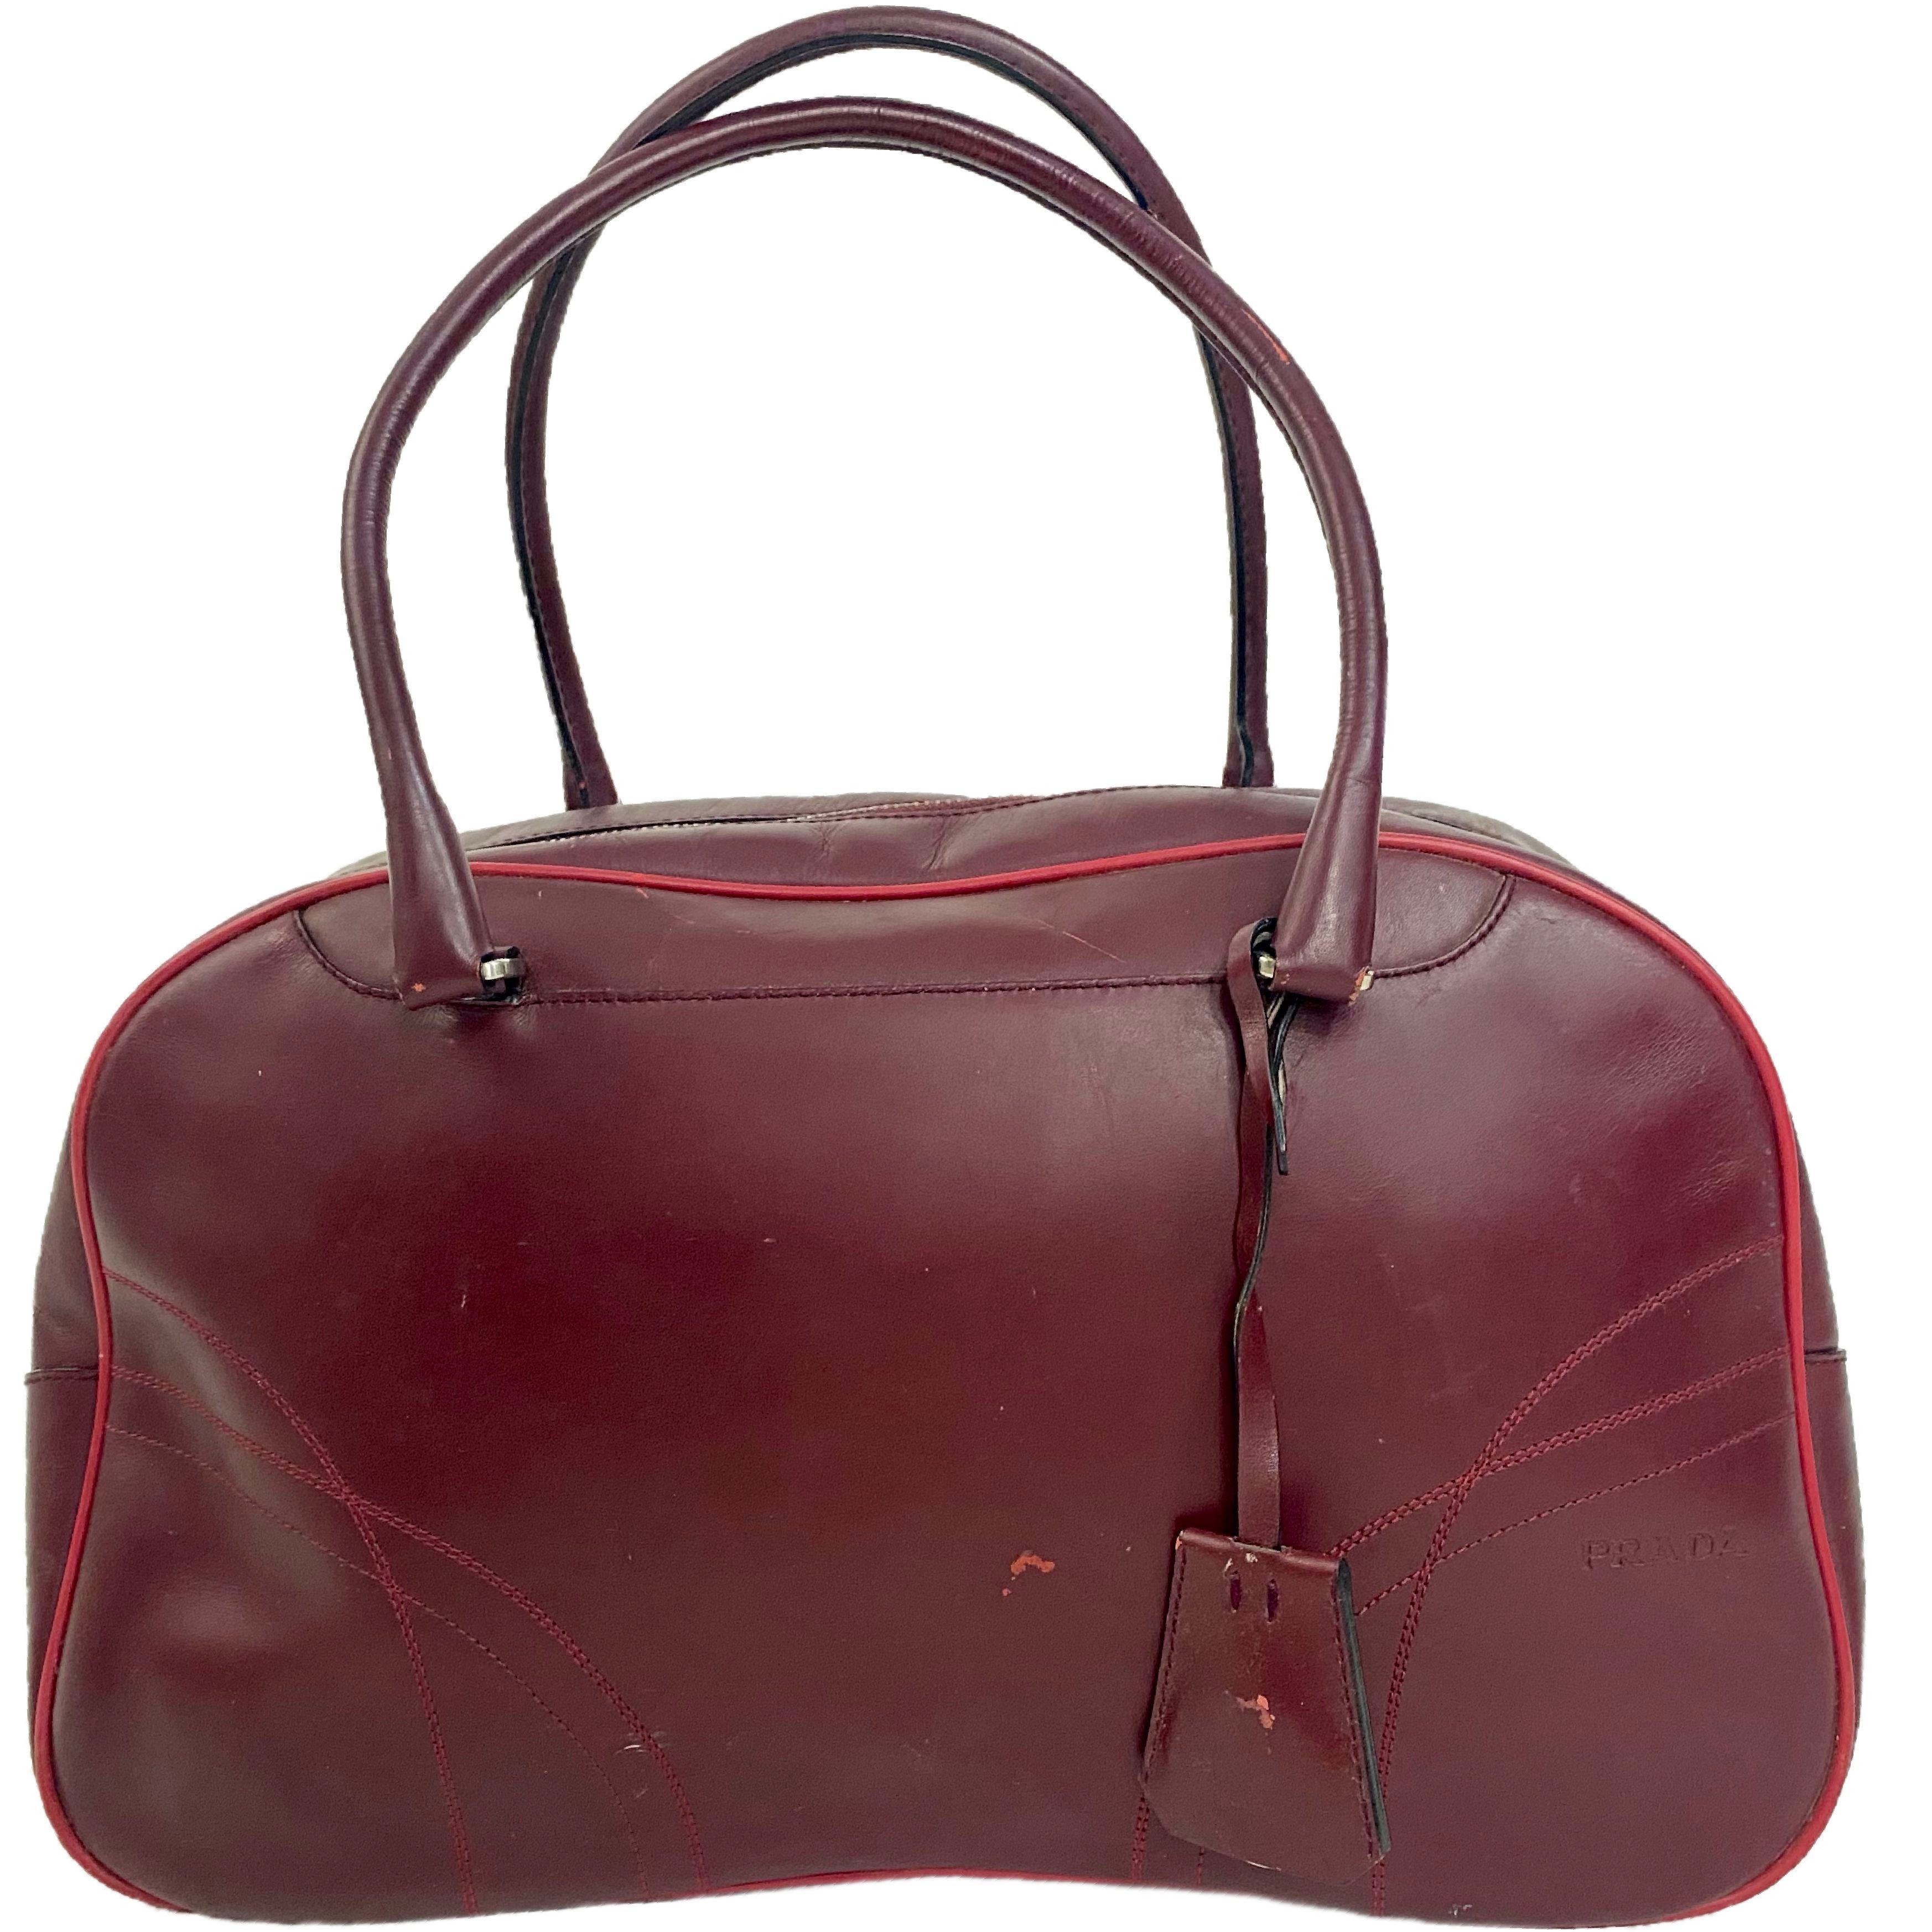 My Dream Commuting Bag: Vintage Prada Tote | Gallery posted by Jenny Cheung  | Lemon8